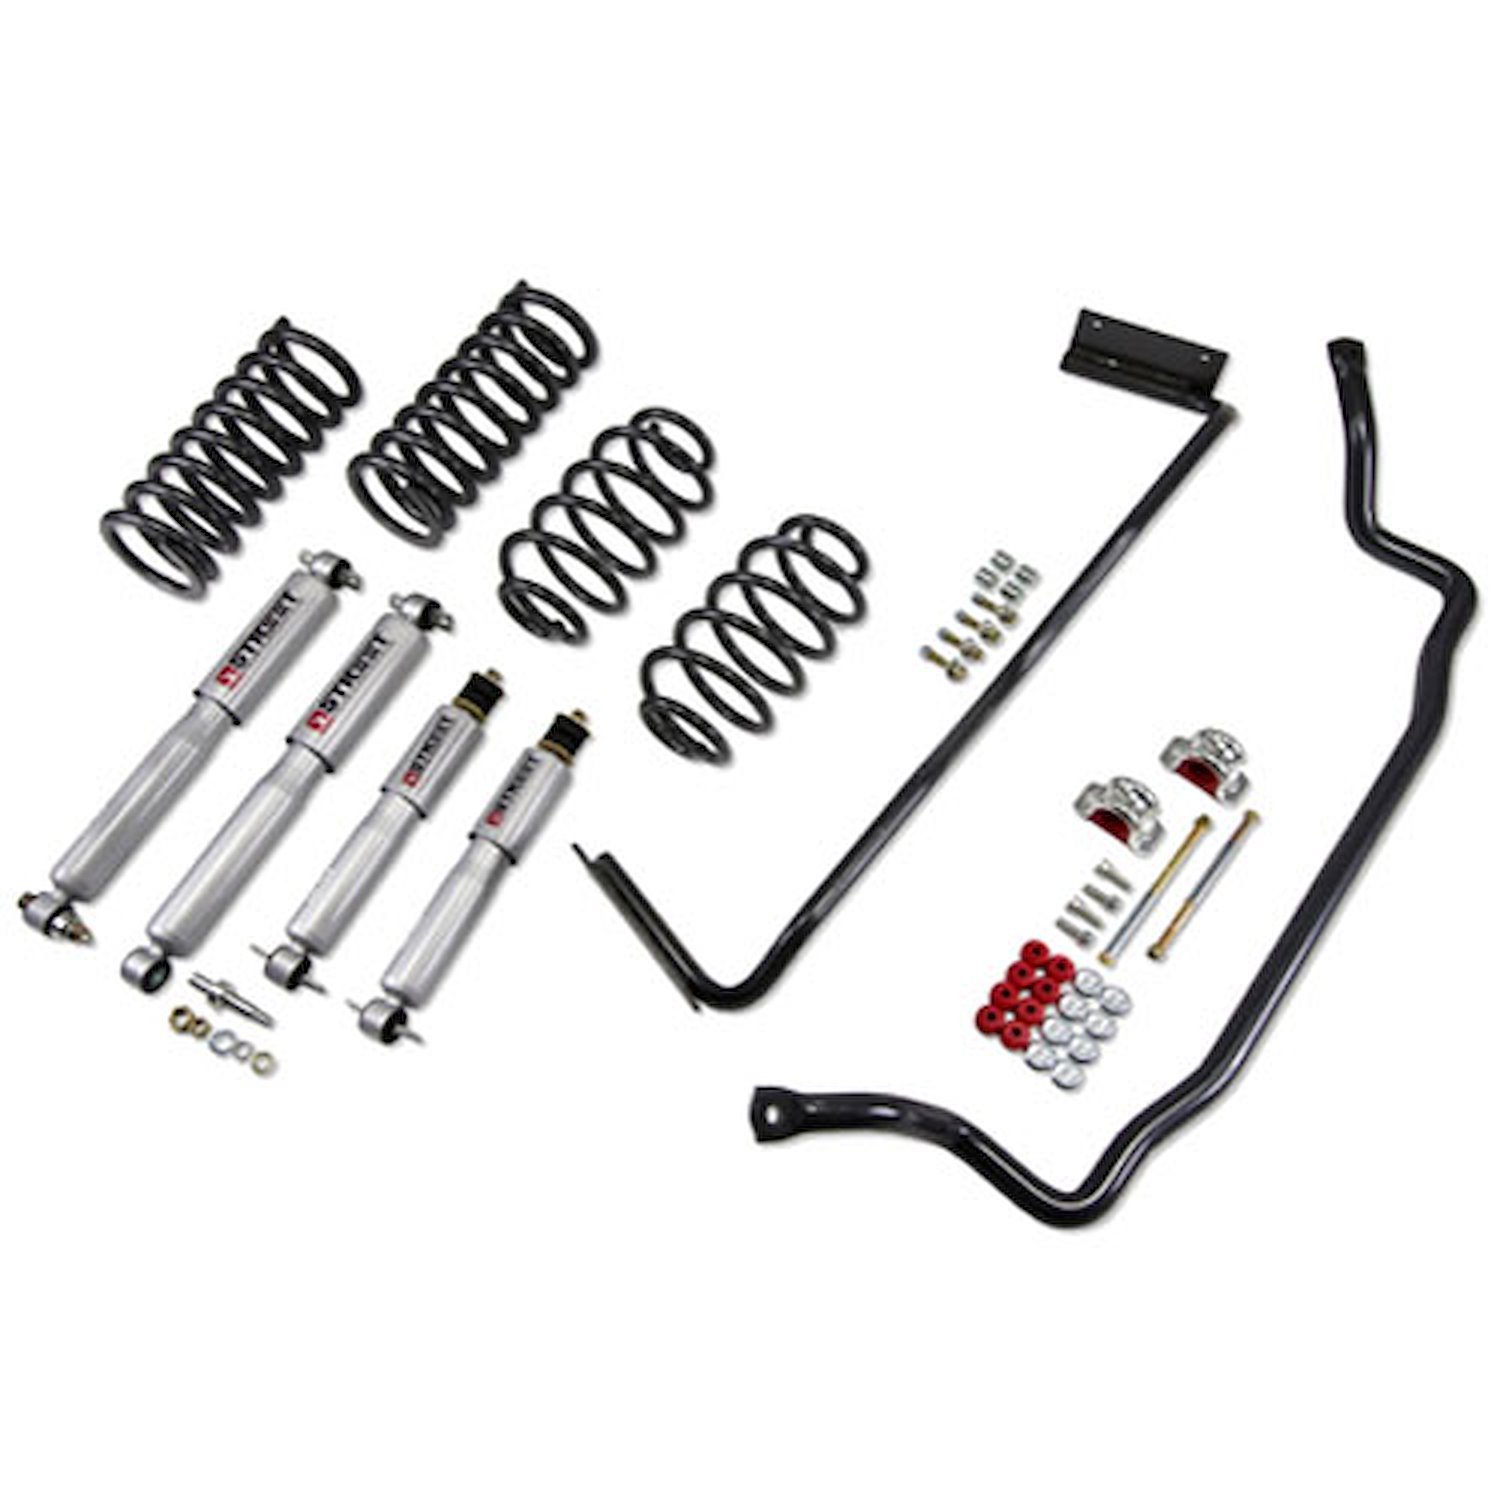 Muscle Car Suspension Kit for 1978-1988 GM G-Body